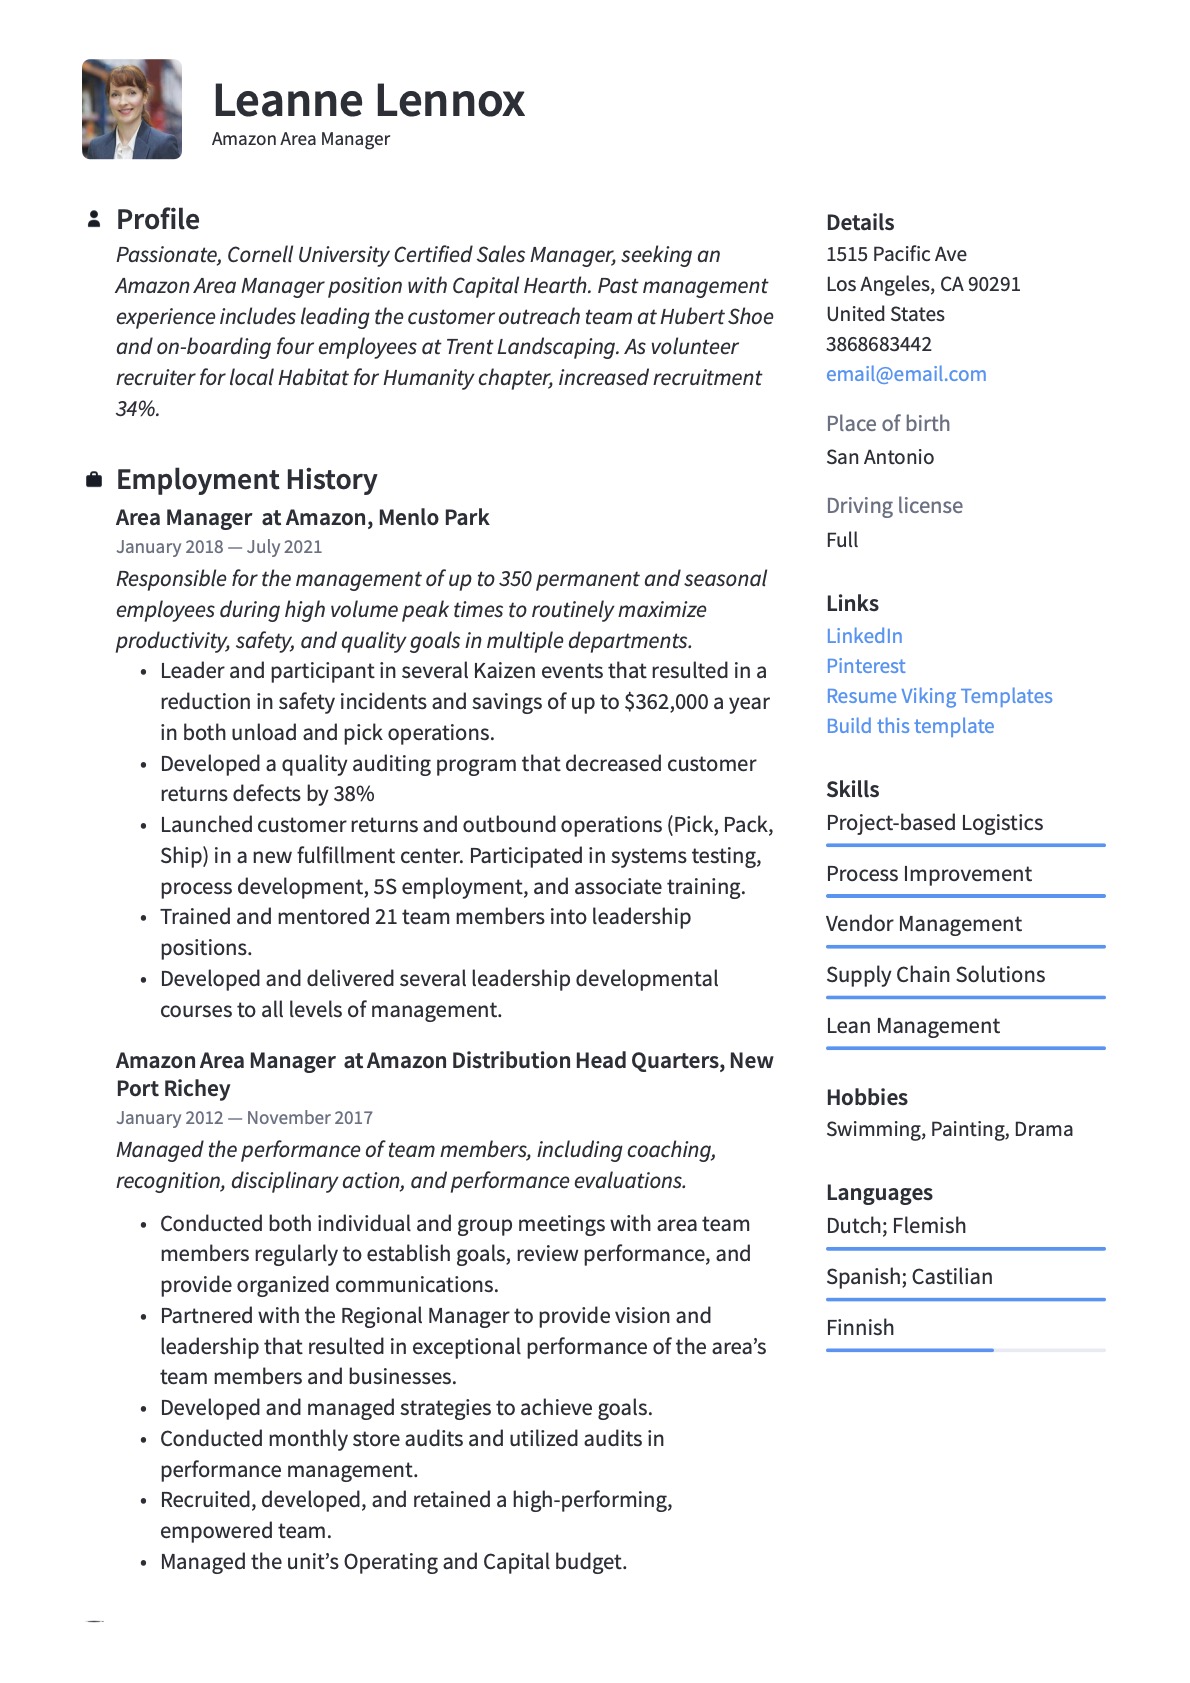 Professional Amazon Area Manager Resume Template